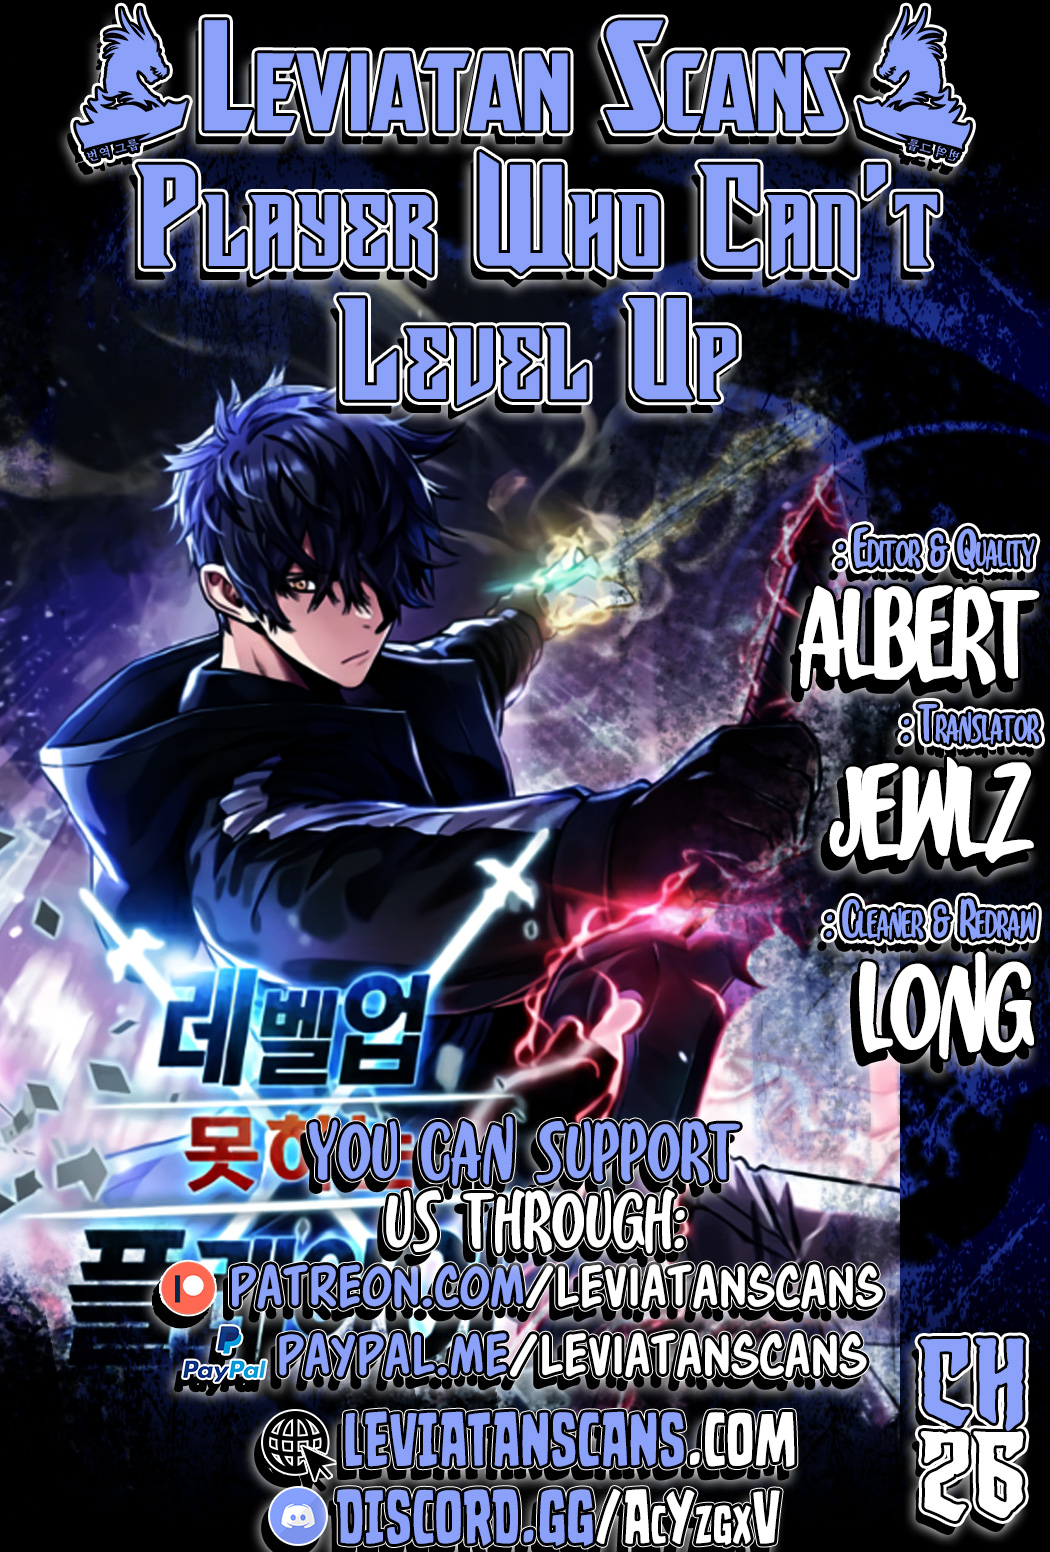 The Player That Can't Level Up - Chapter 2554 - Image 1